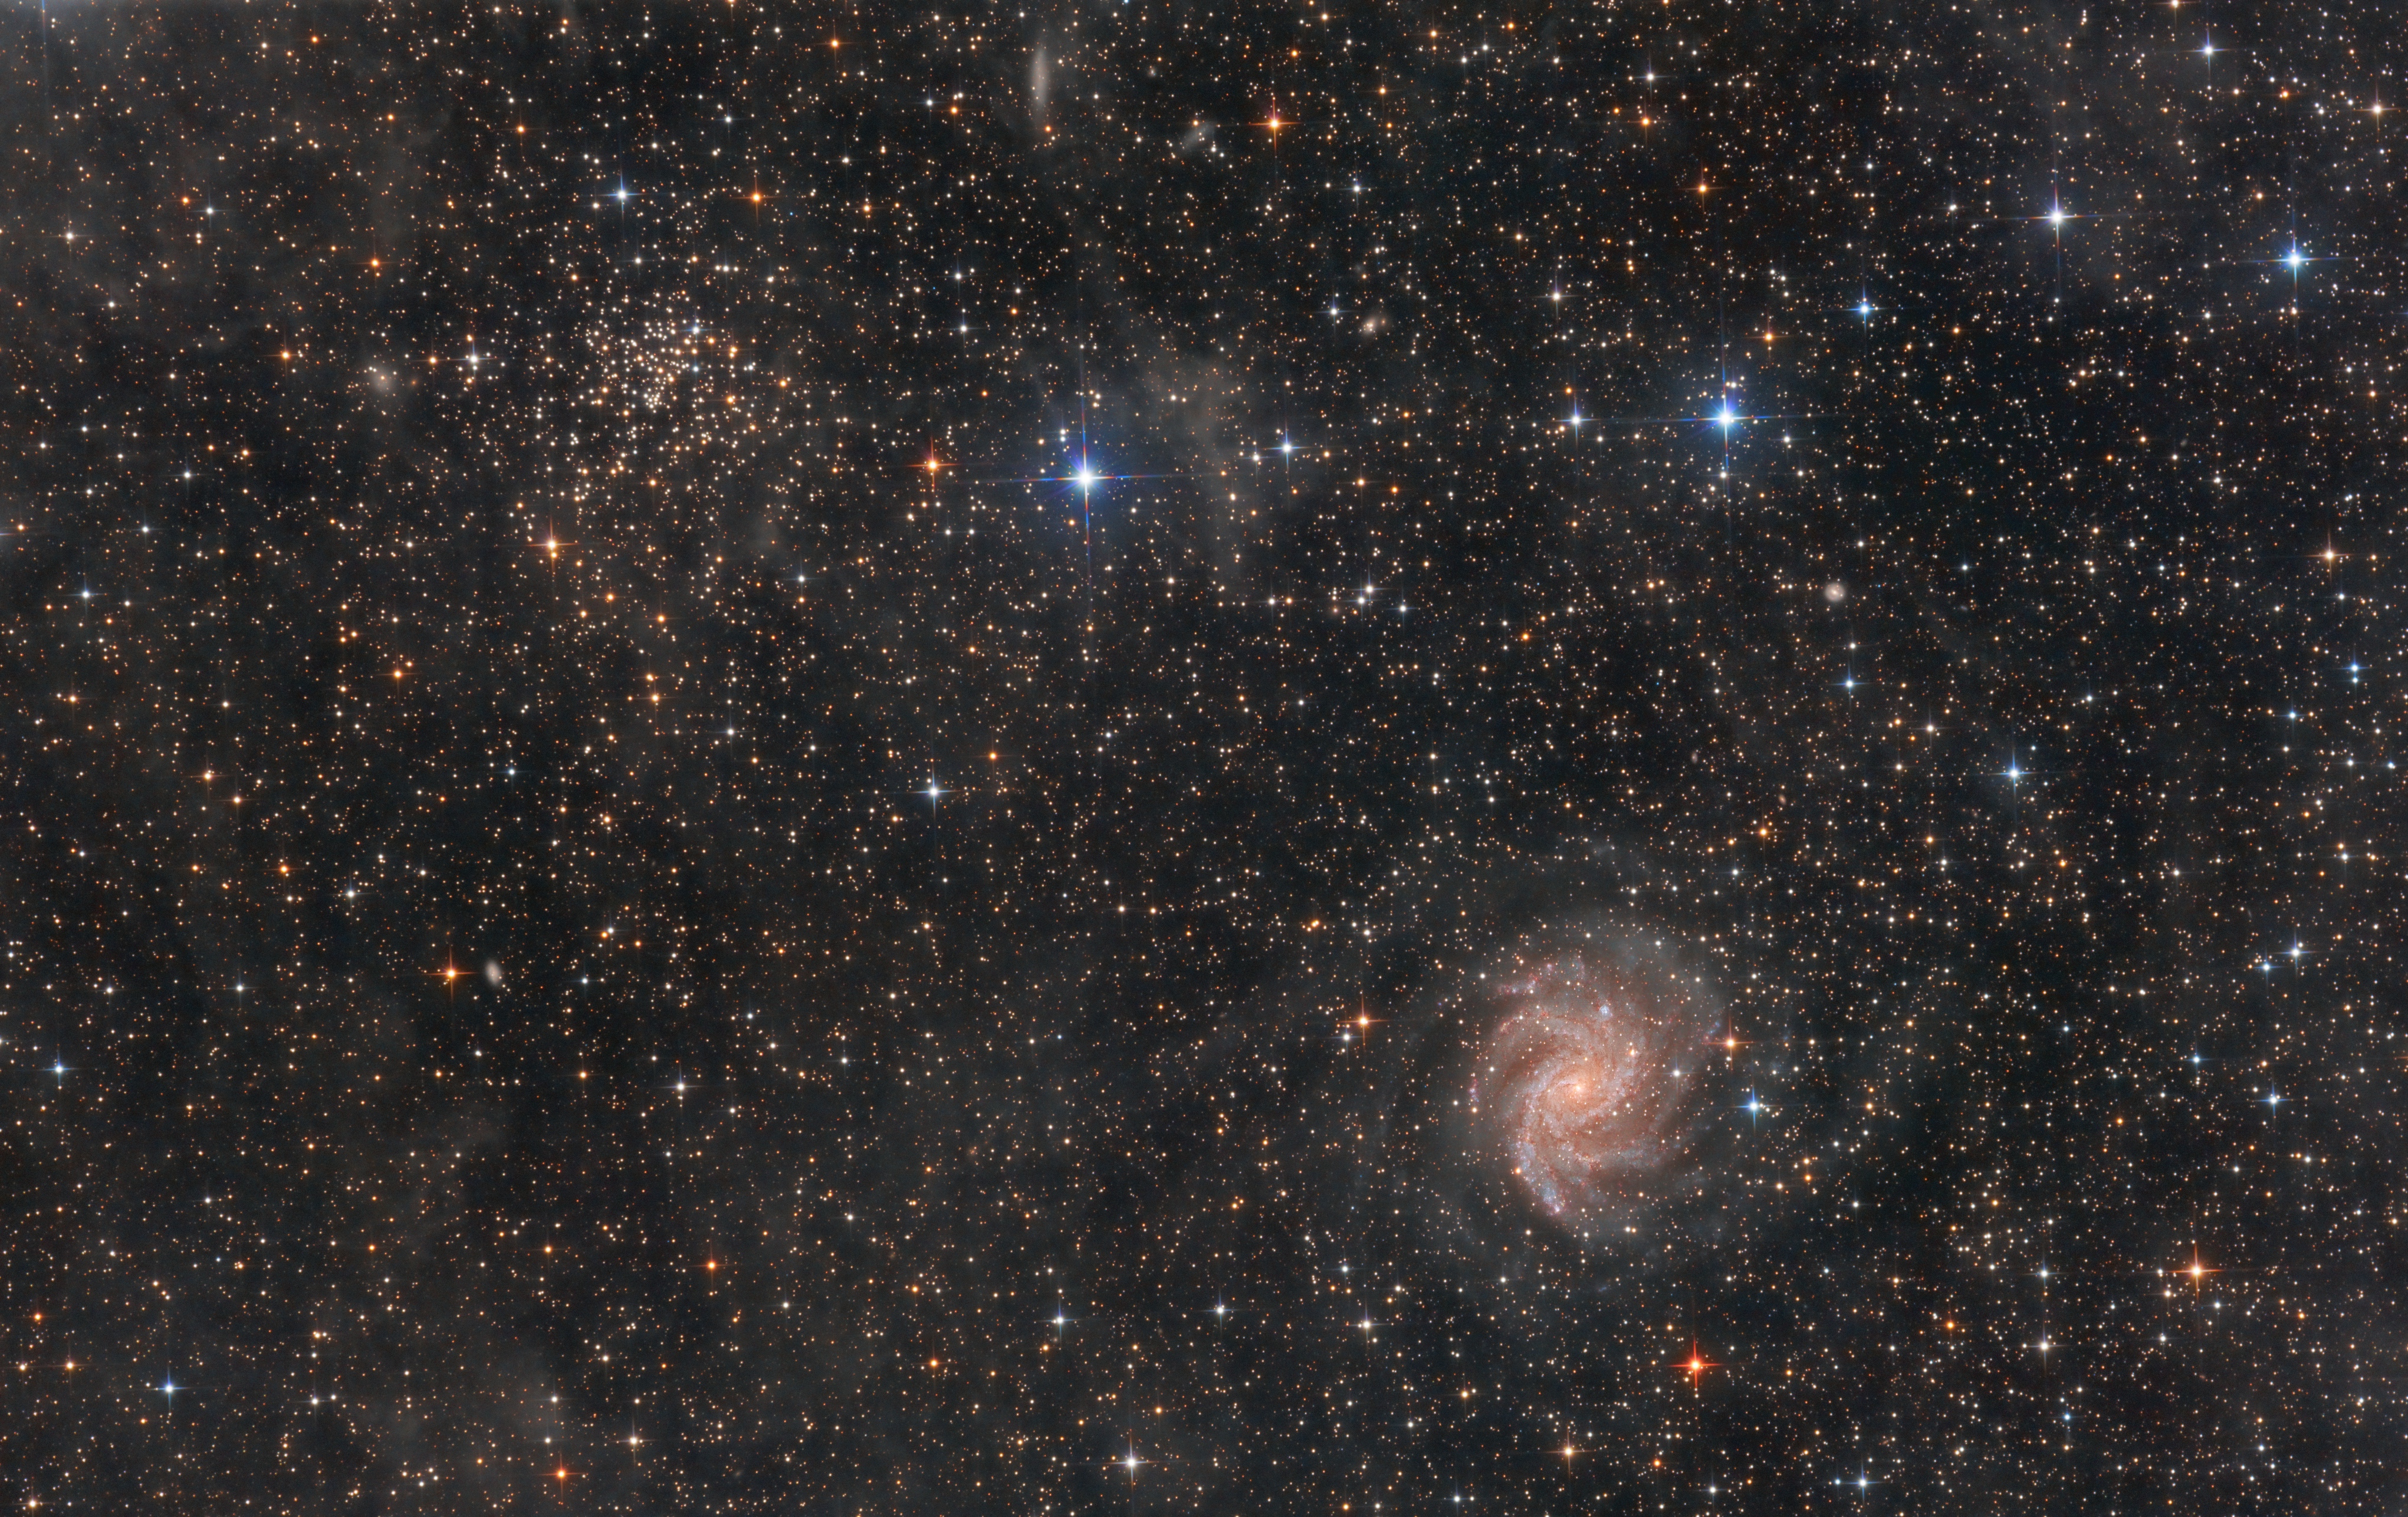 The Starburst Spiral Galaxy NGC 6946 and the Open Cluster NGC 6939